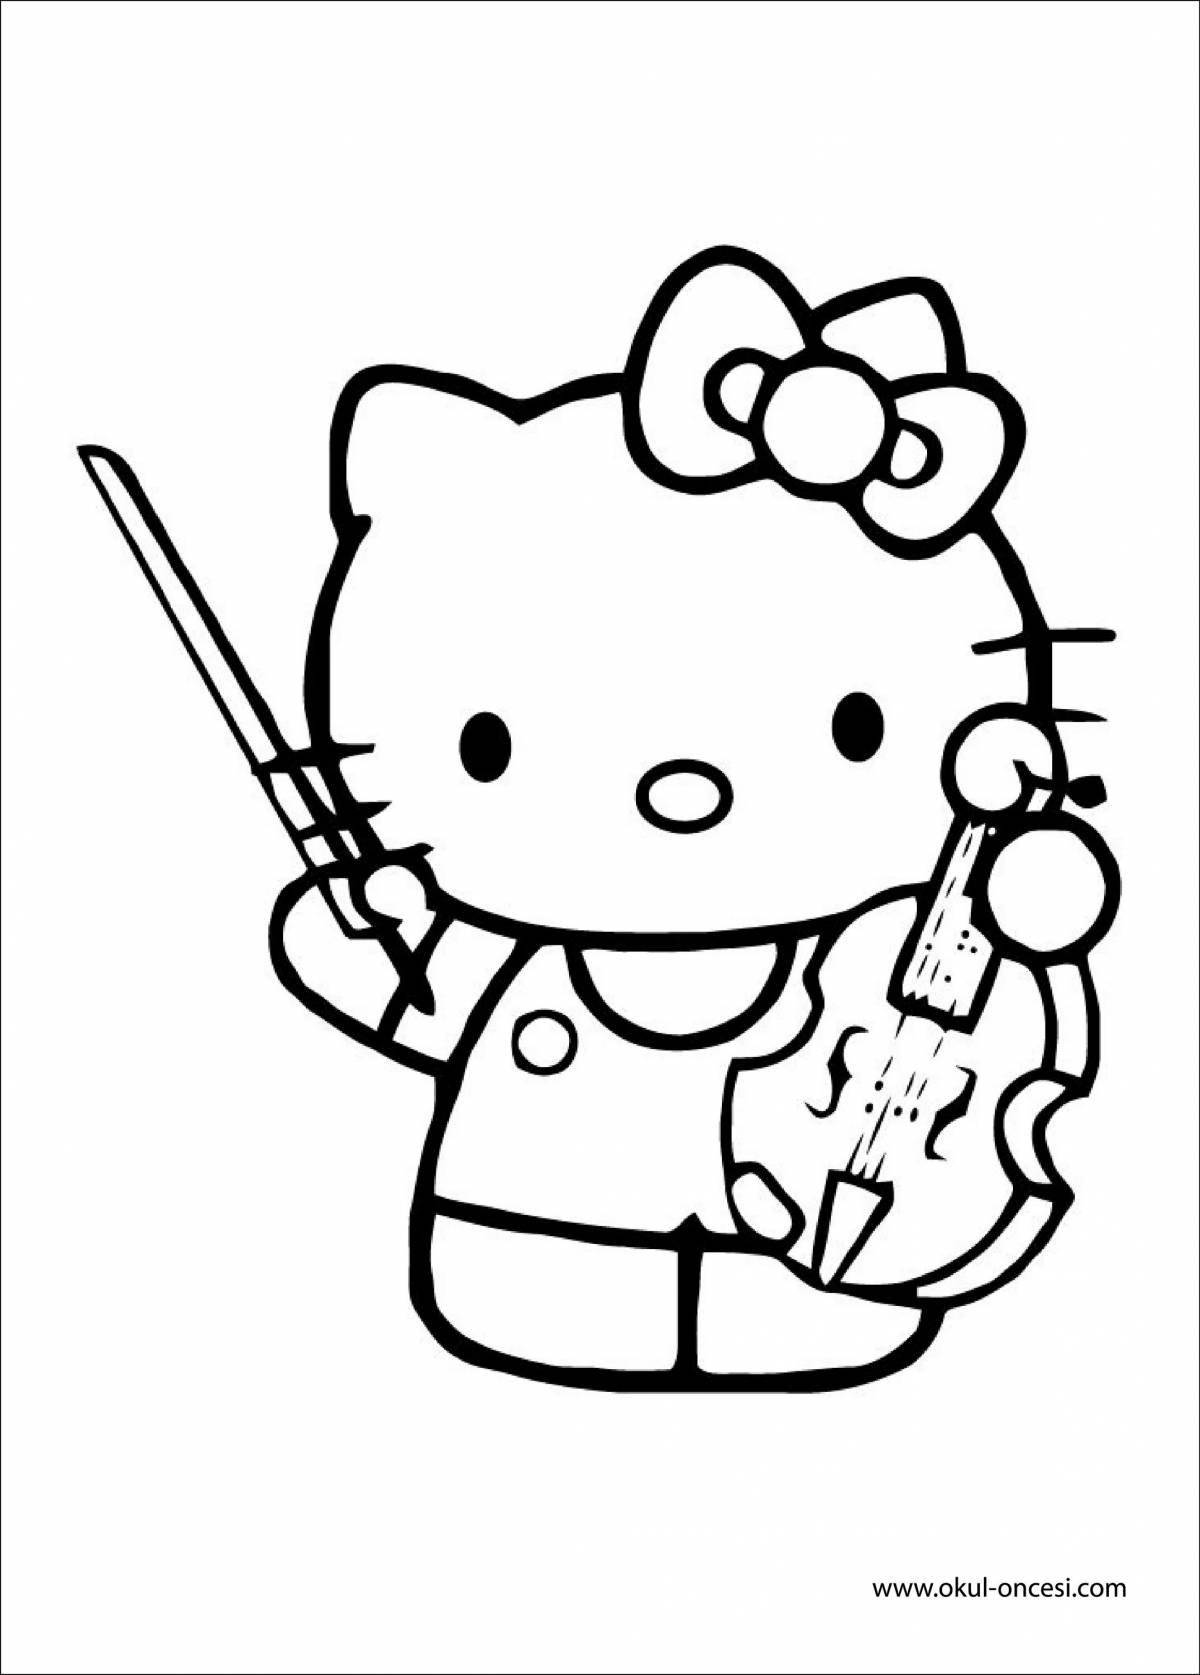 Coloring gust hello kitty